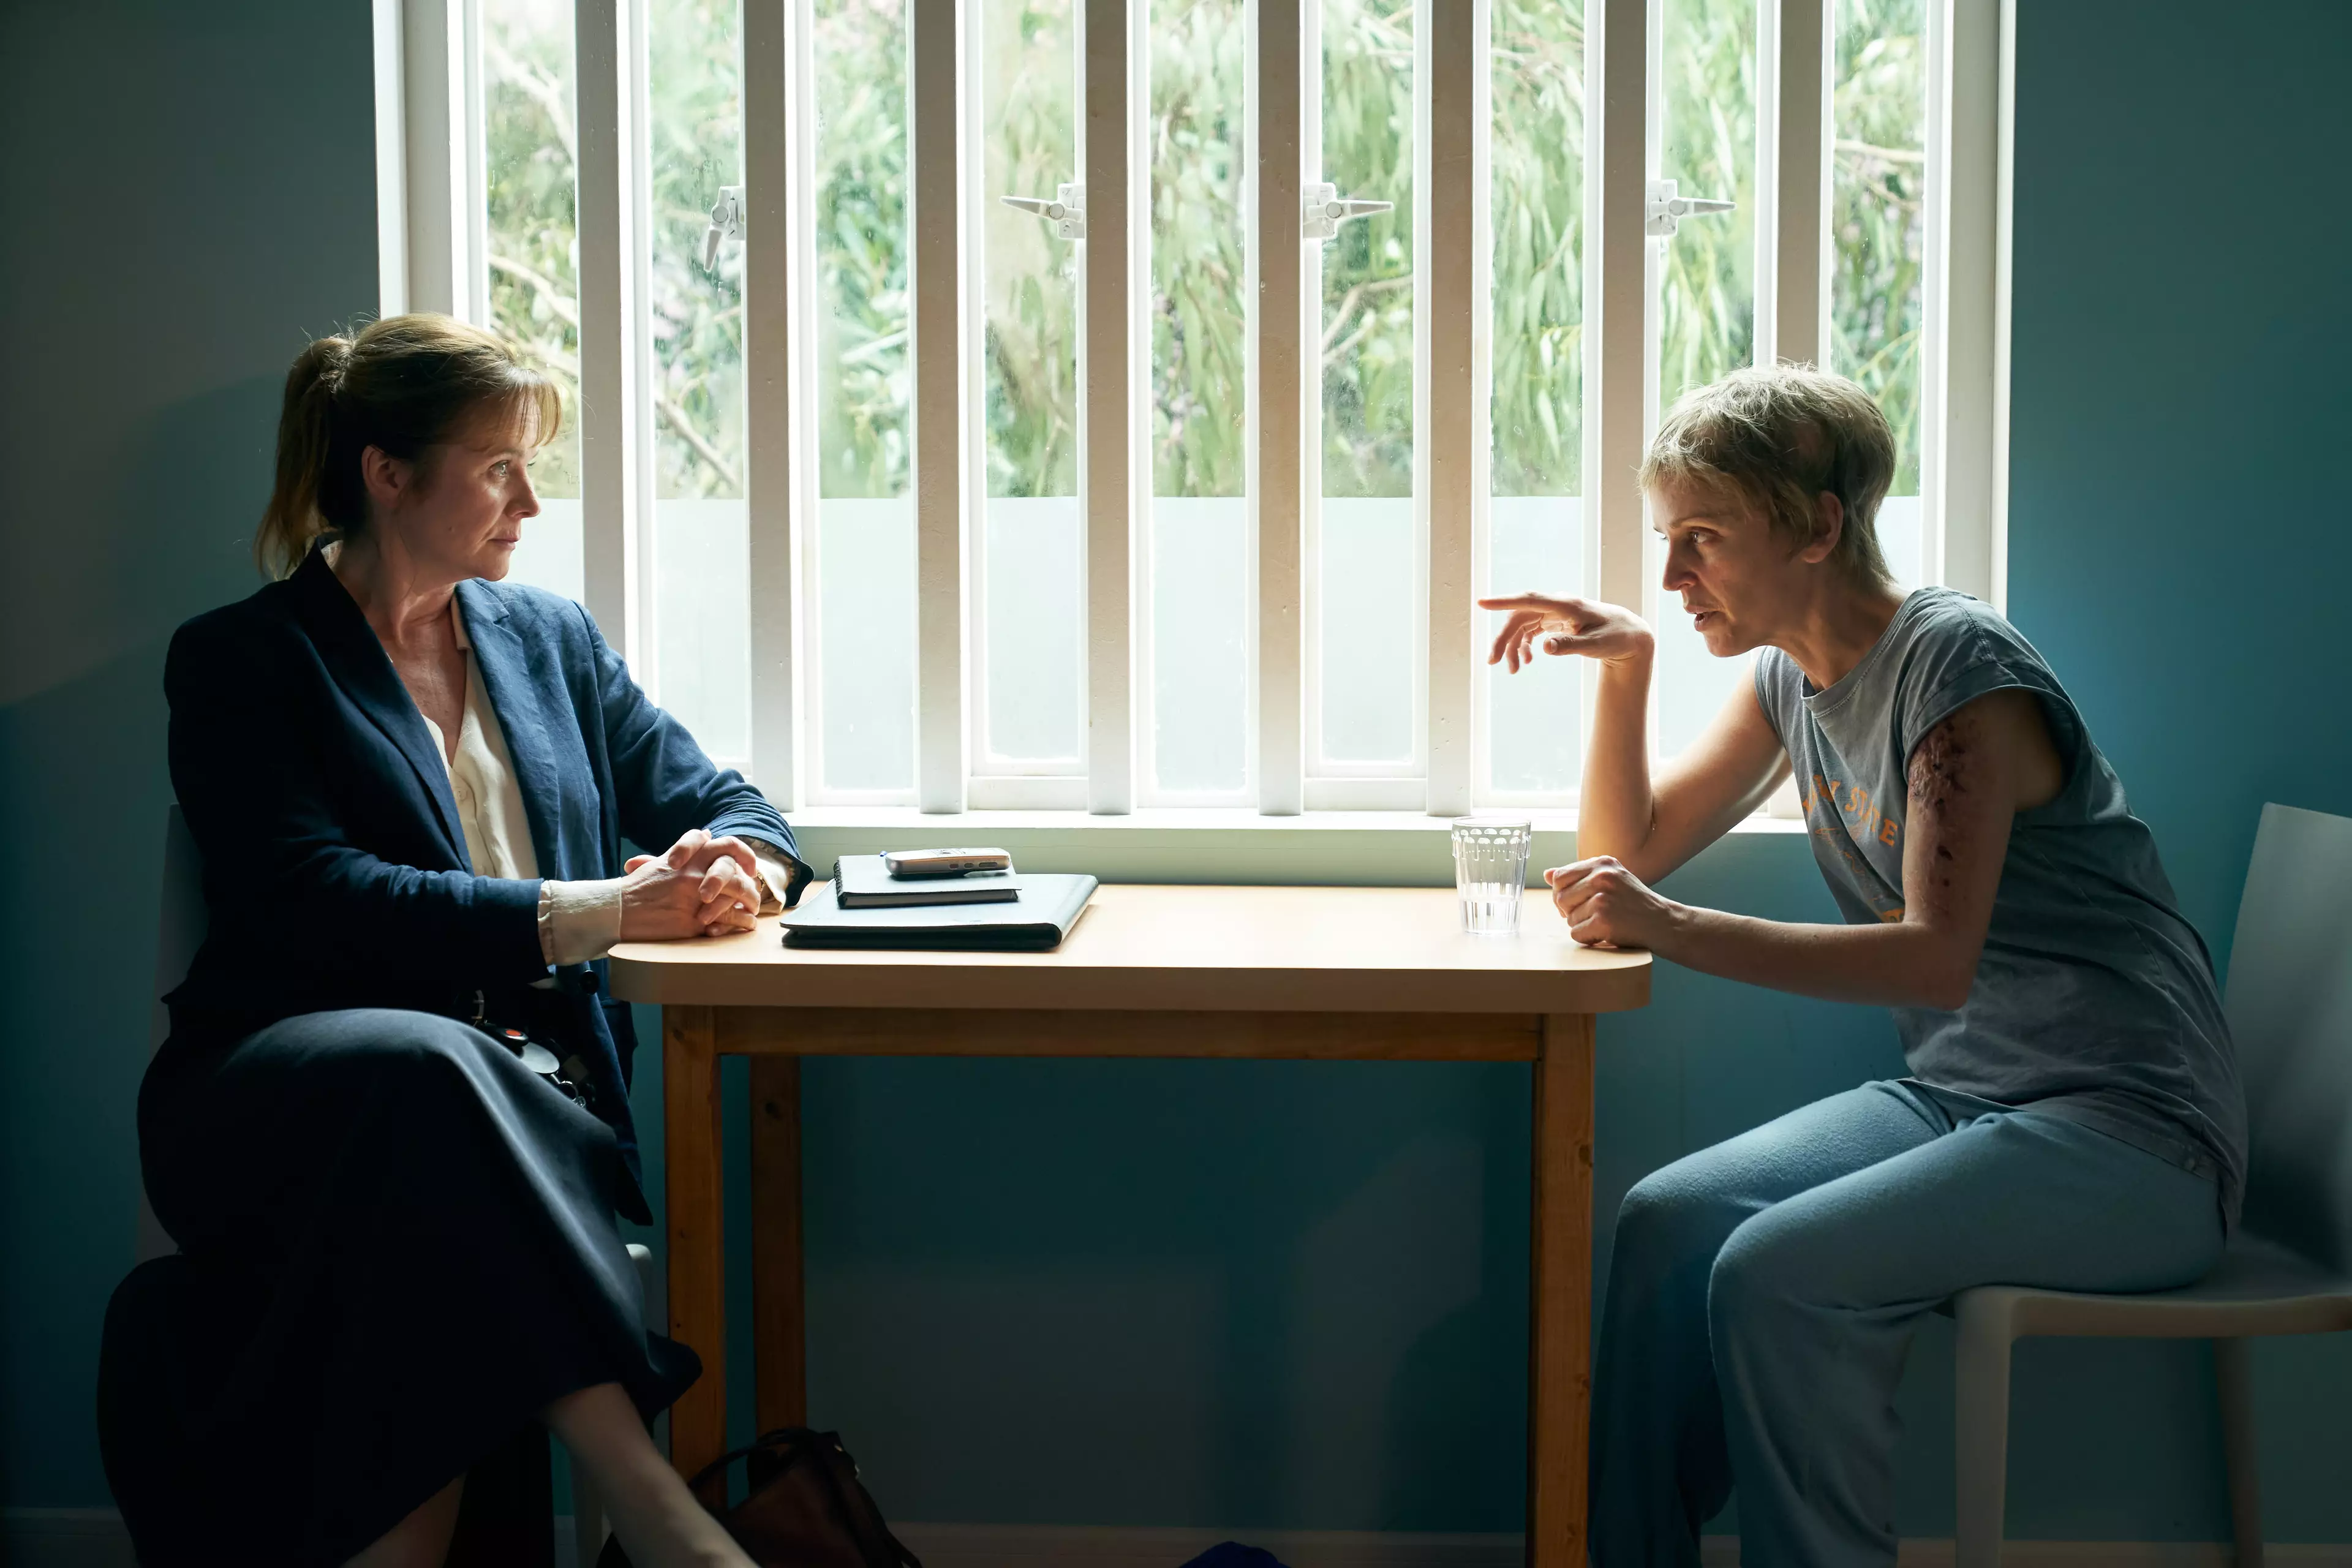 The new psychological thriller stars Emily Watson and Denise Gough (